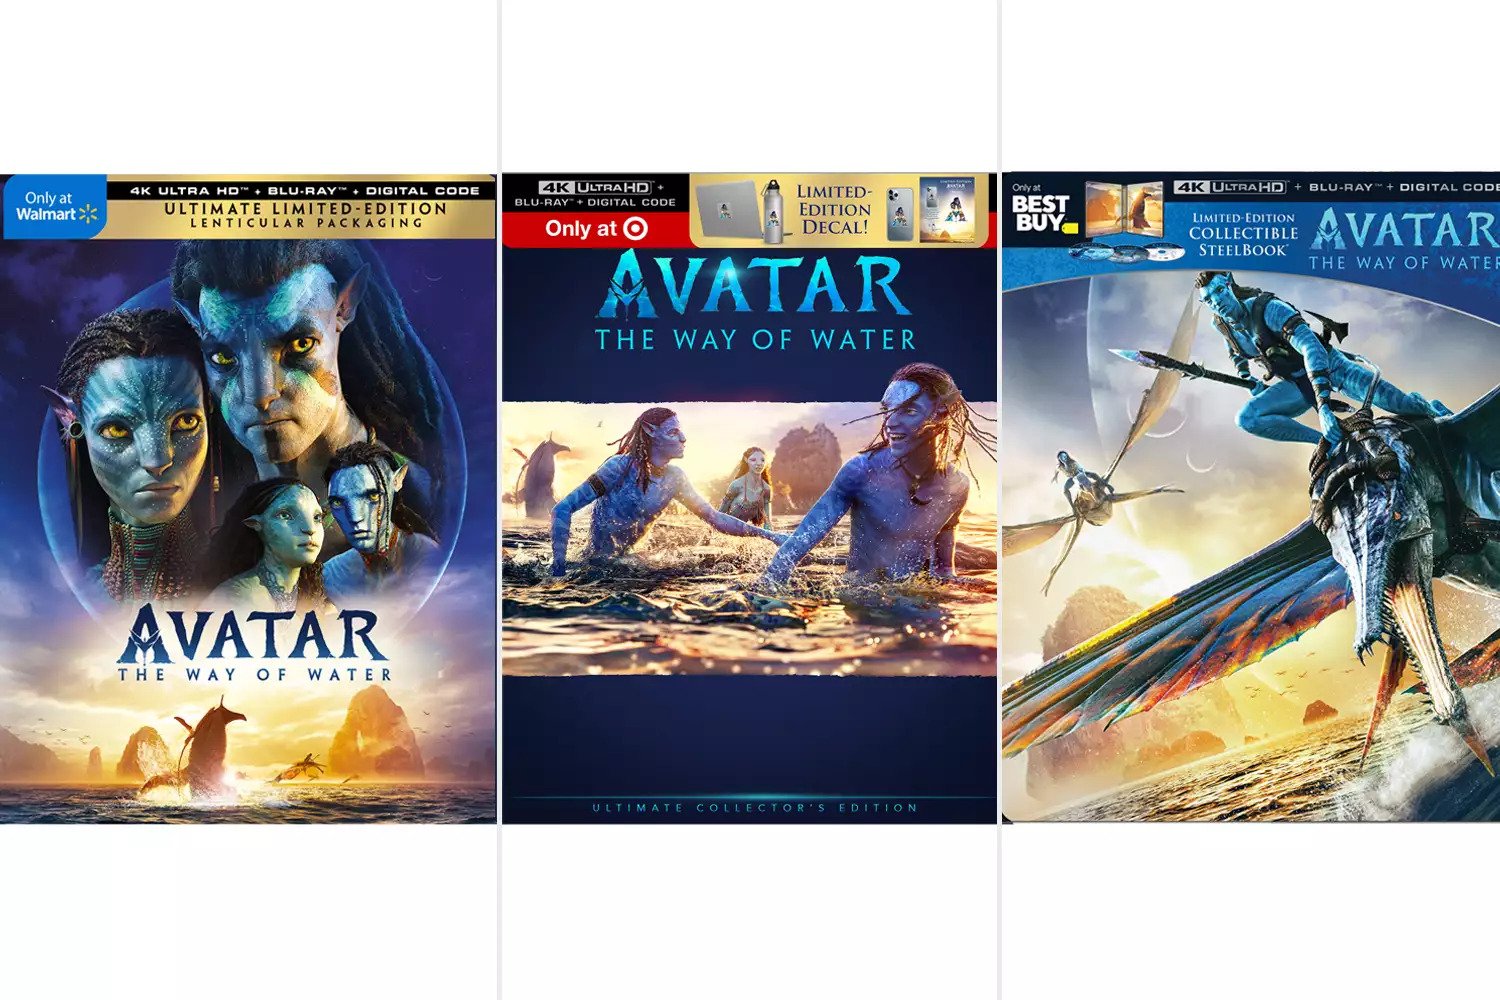 Avatar The Way of The Water USA retailers exclusives.jpg